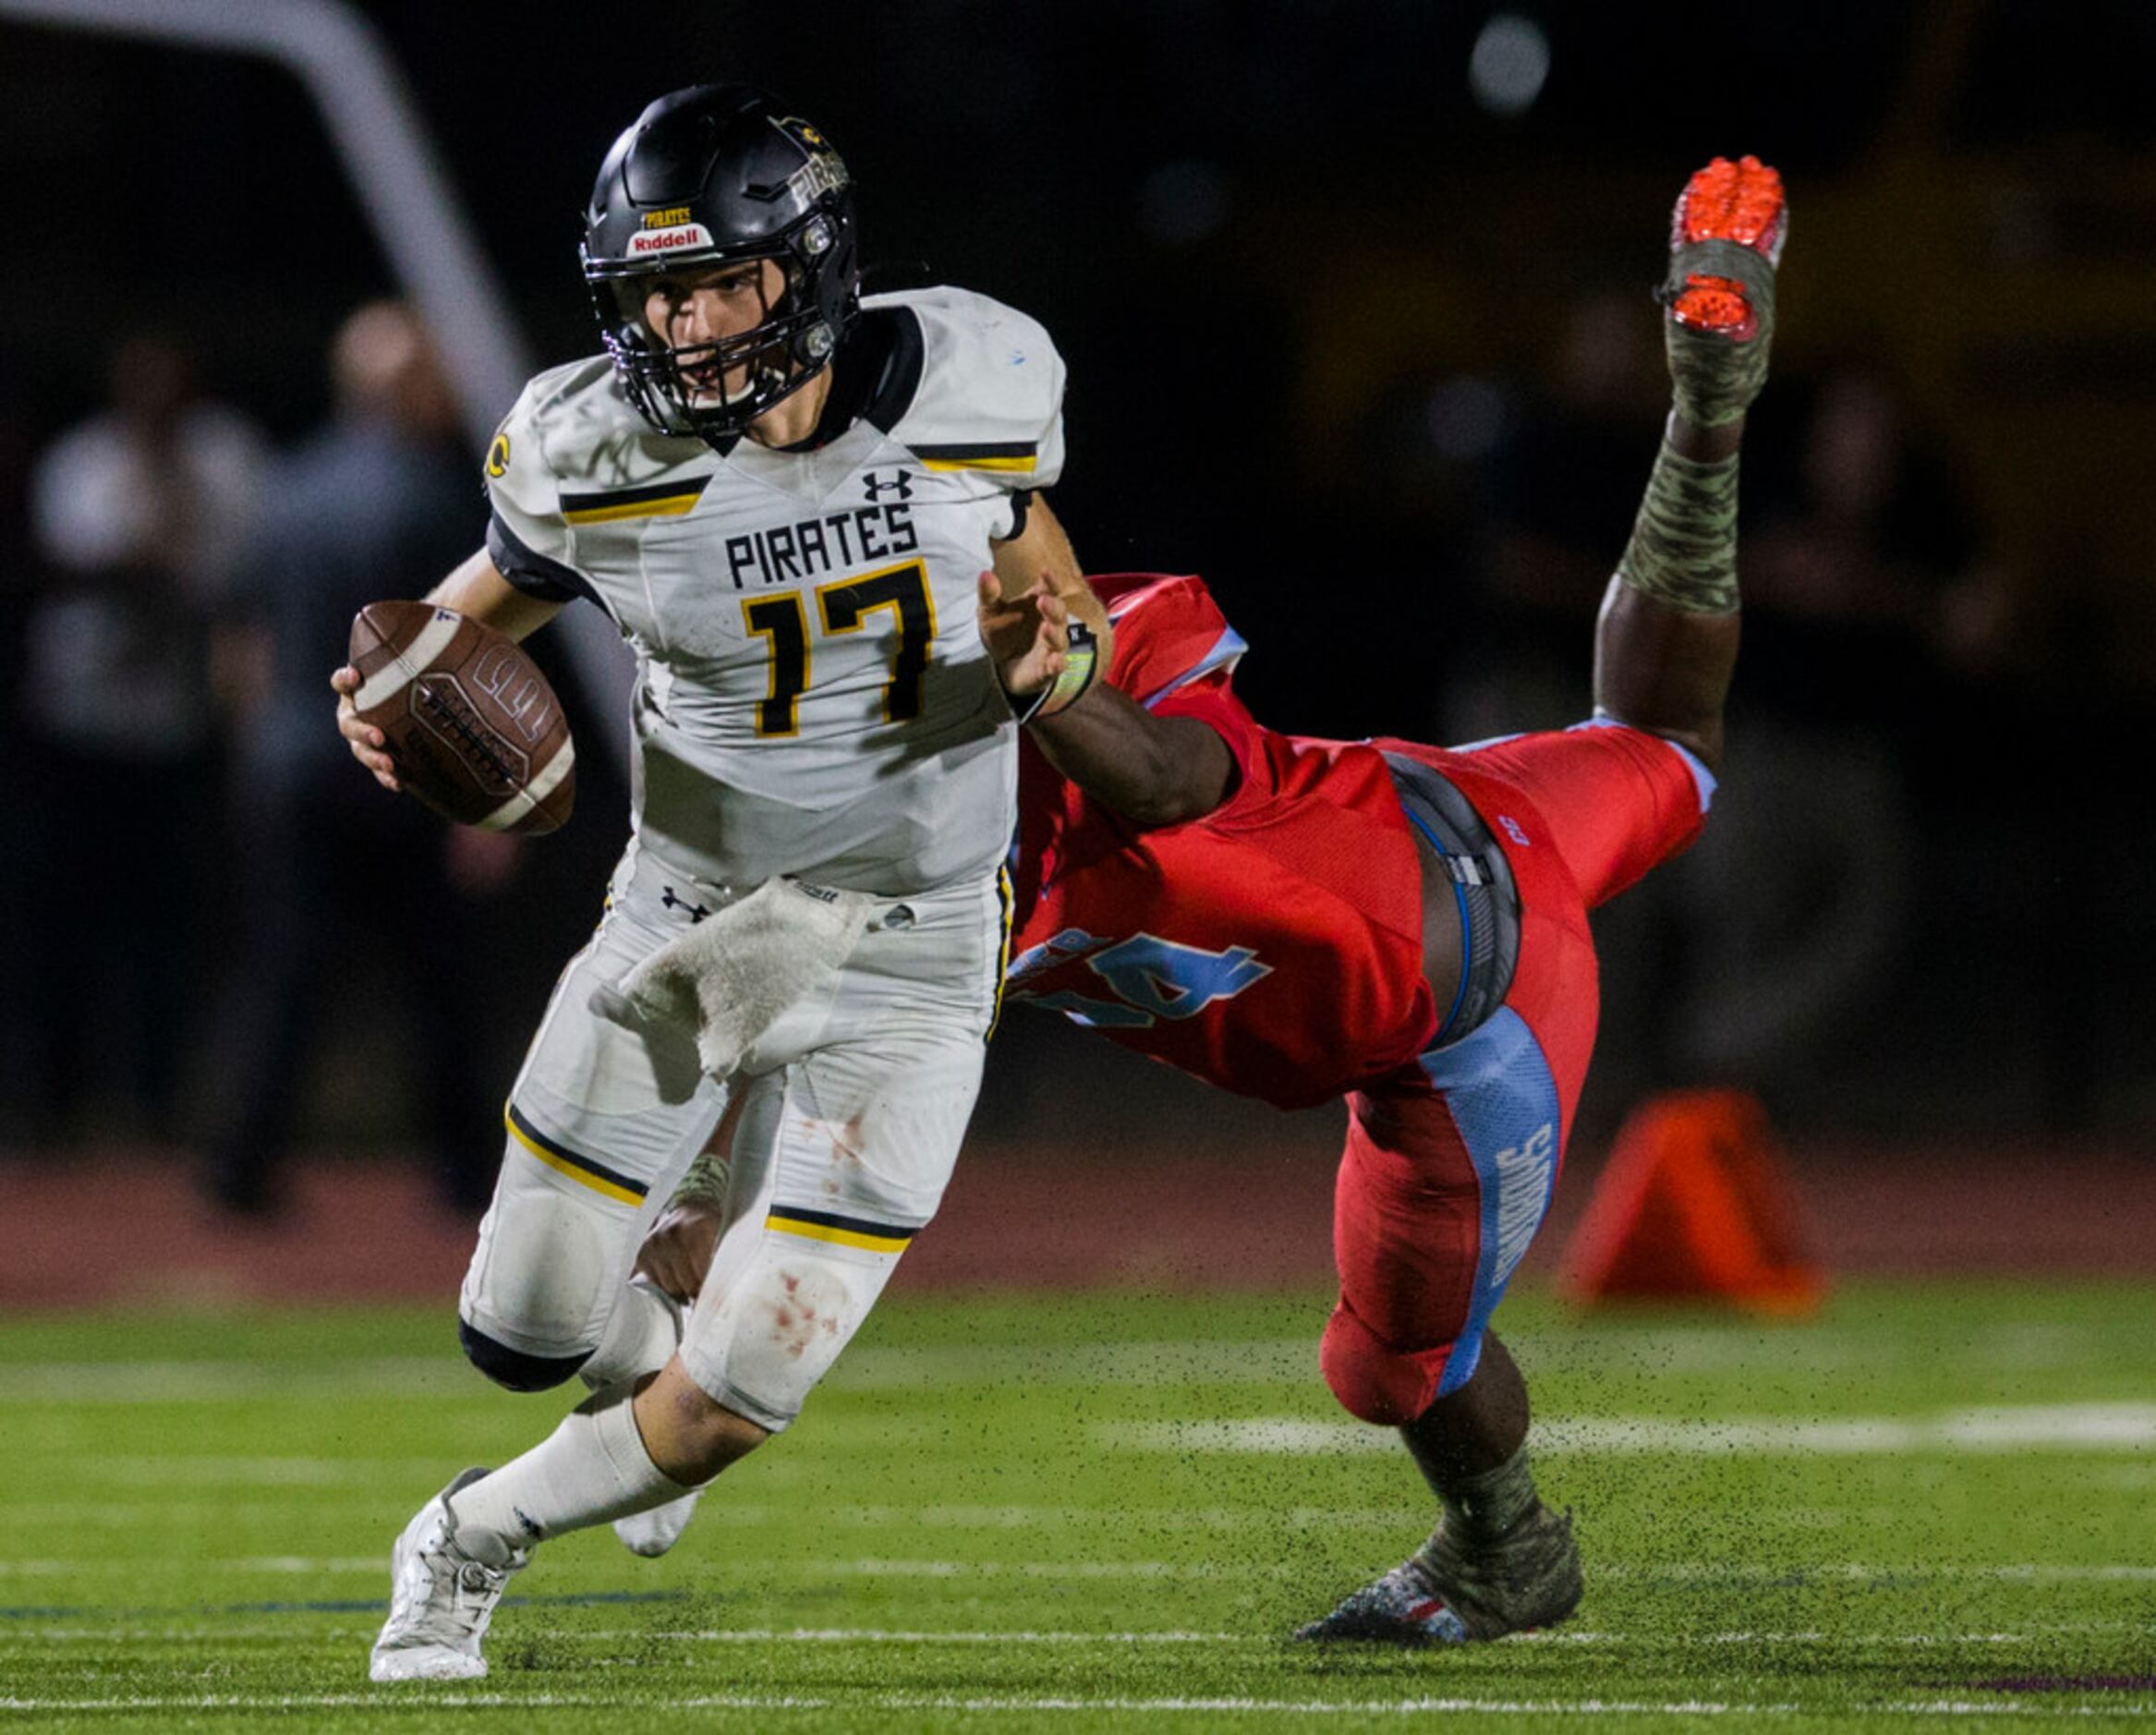 Crandall quarterback Holt Reese (17) is tackled by Carter linebacker Randy Anthony (54)...